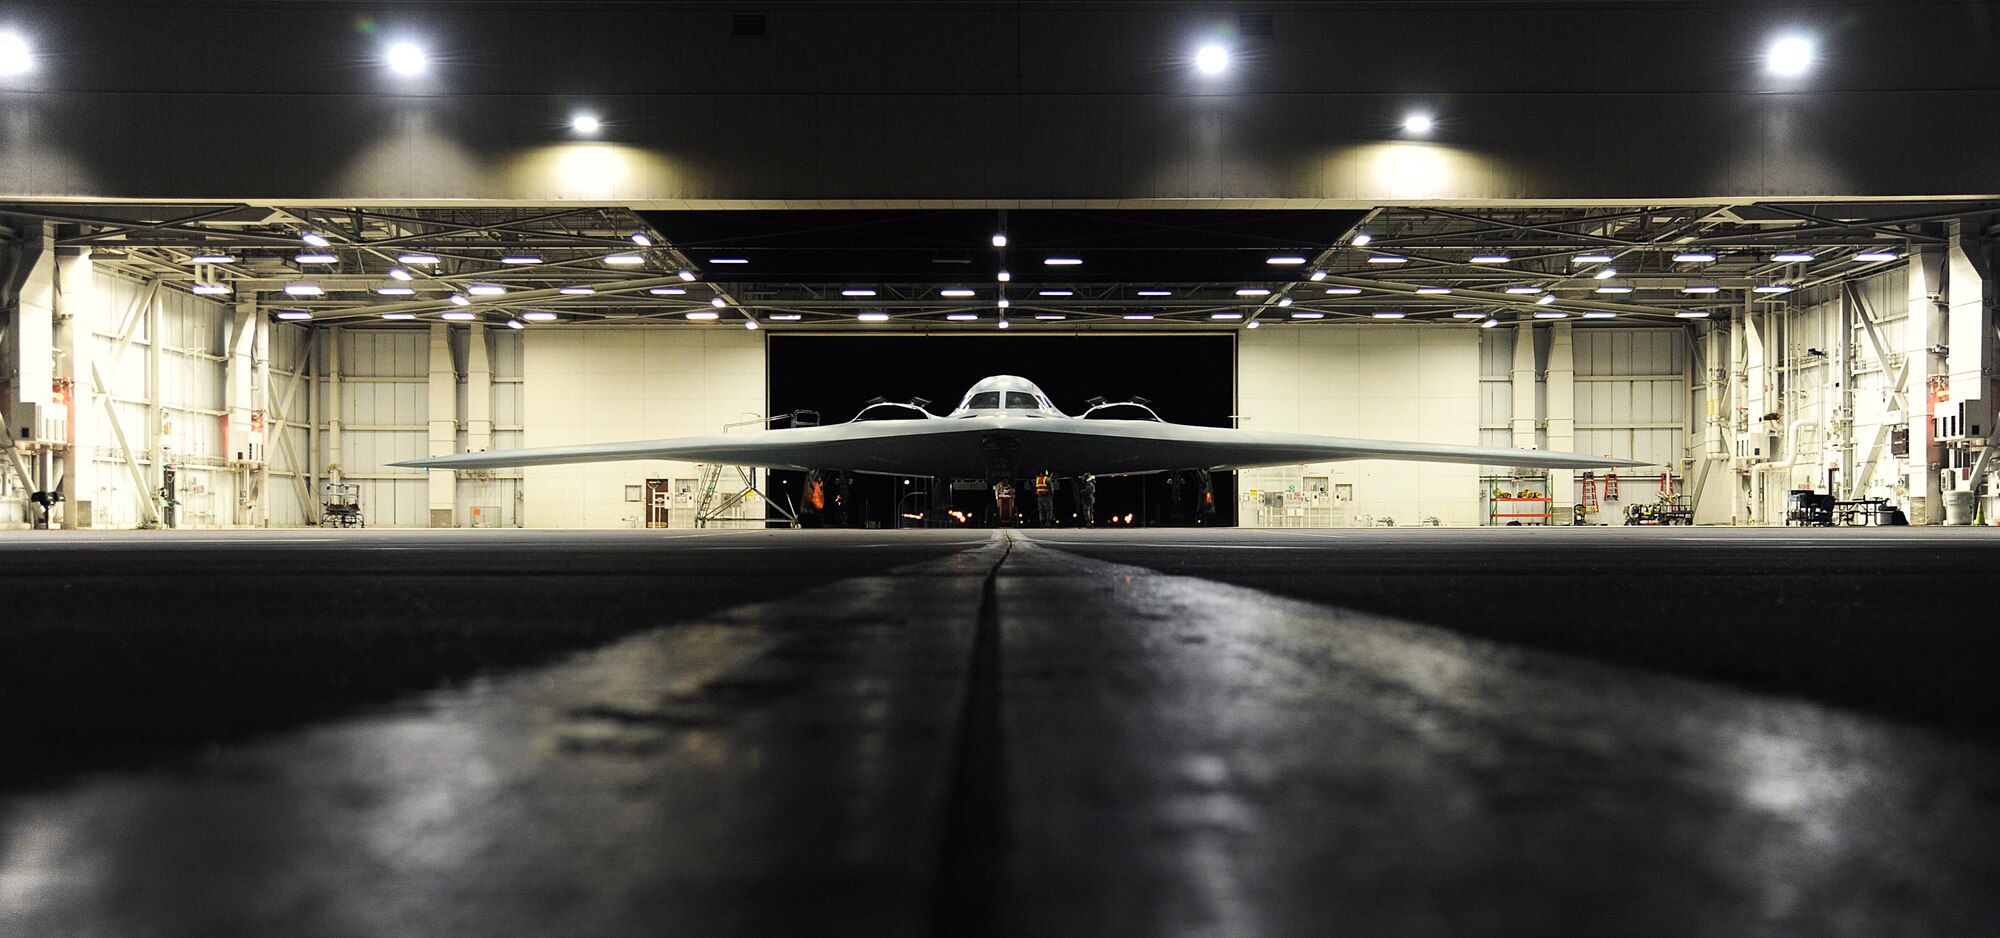 Prior to takeoff for a Red Flag (RF) 16-1 night mission, a U.S. Air Force B-2 Spirit aircraft sits in a dock at Whiteman Air Force Base, Mo., Feb. 2, 2016. RF 16-1 is a three-week long realistic combat training exercise in the skies over the Nevada Test and Training Range that includes a variety of attack, fighter and bomber aircraft. (U.S. Air Force photo by Airman 1st Class Michaela R. Slanchik)